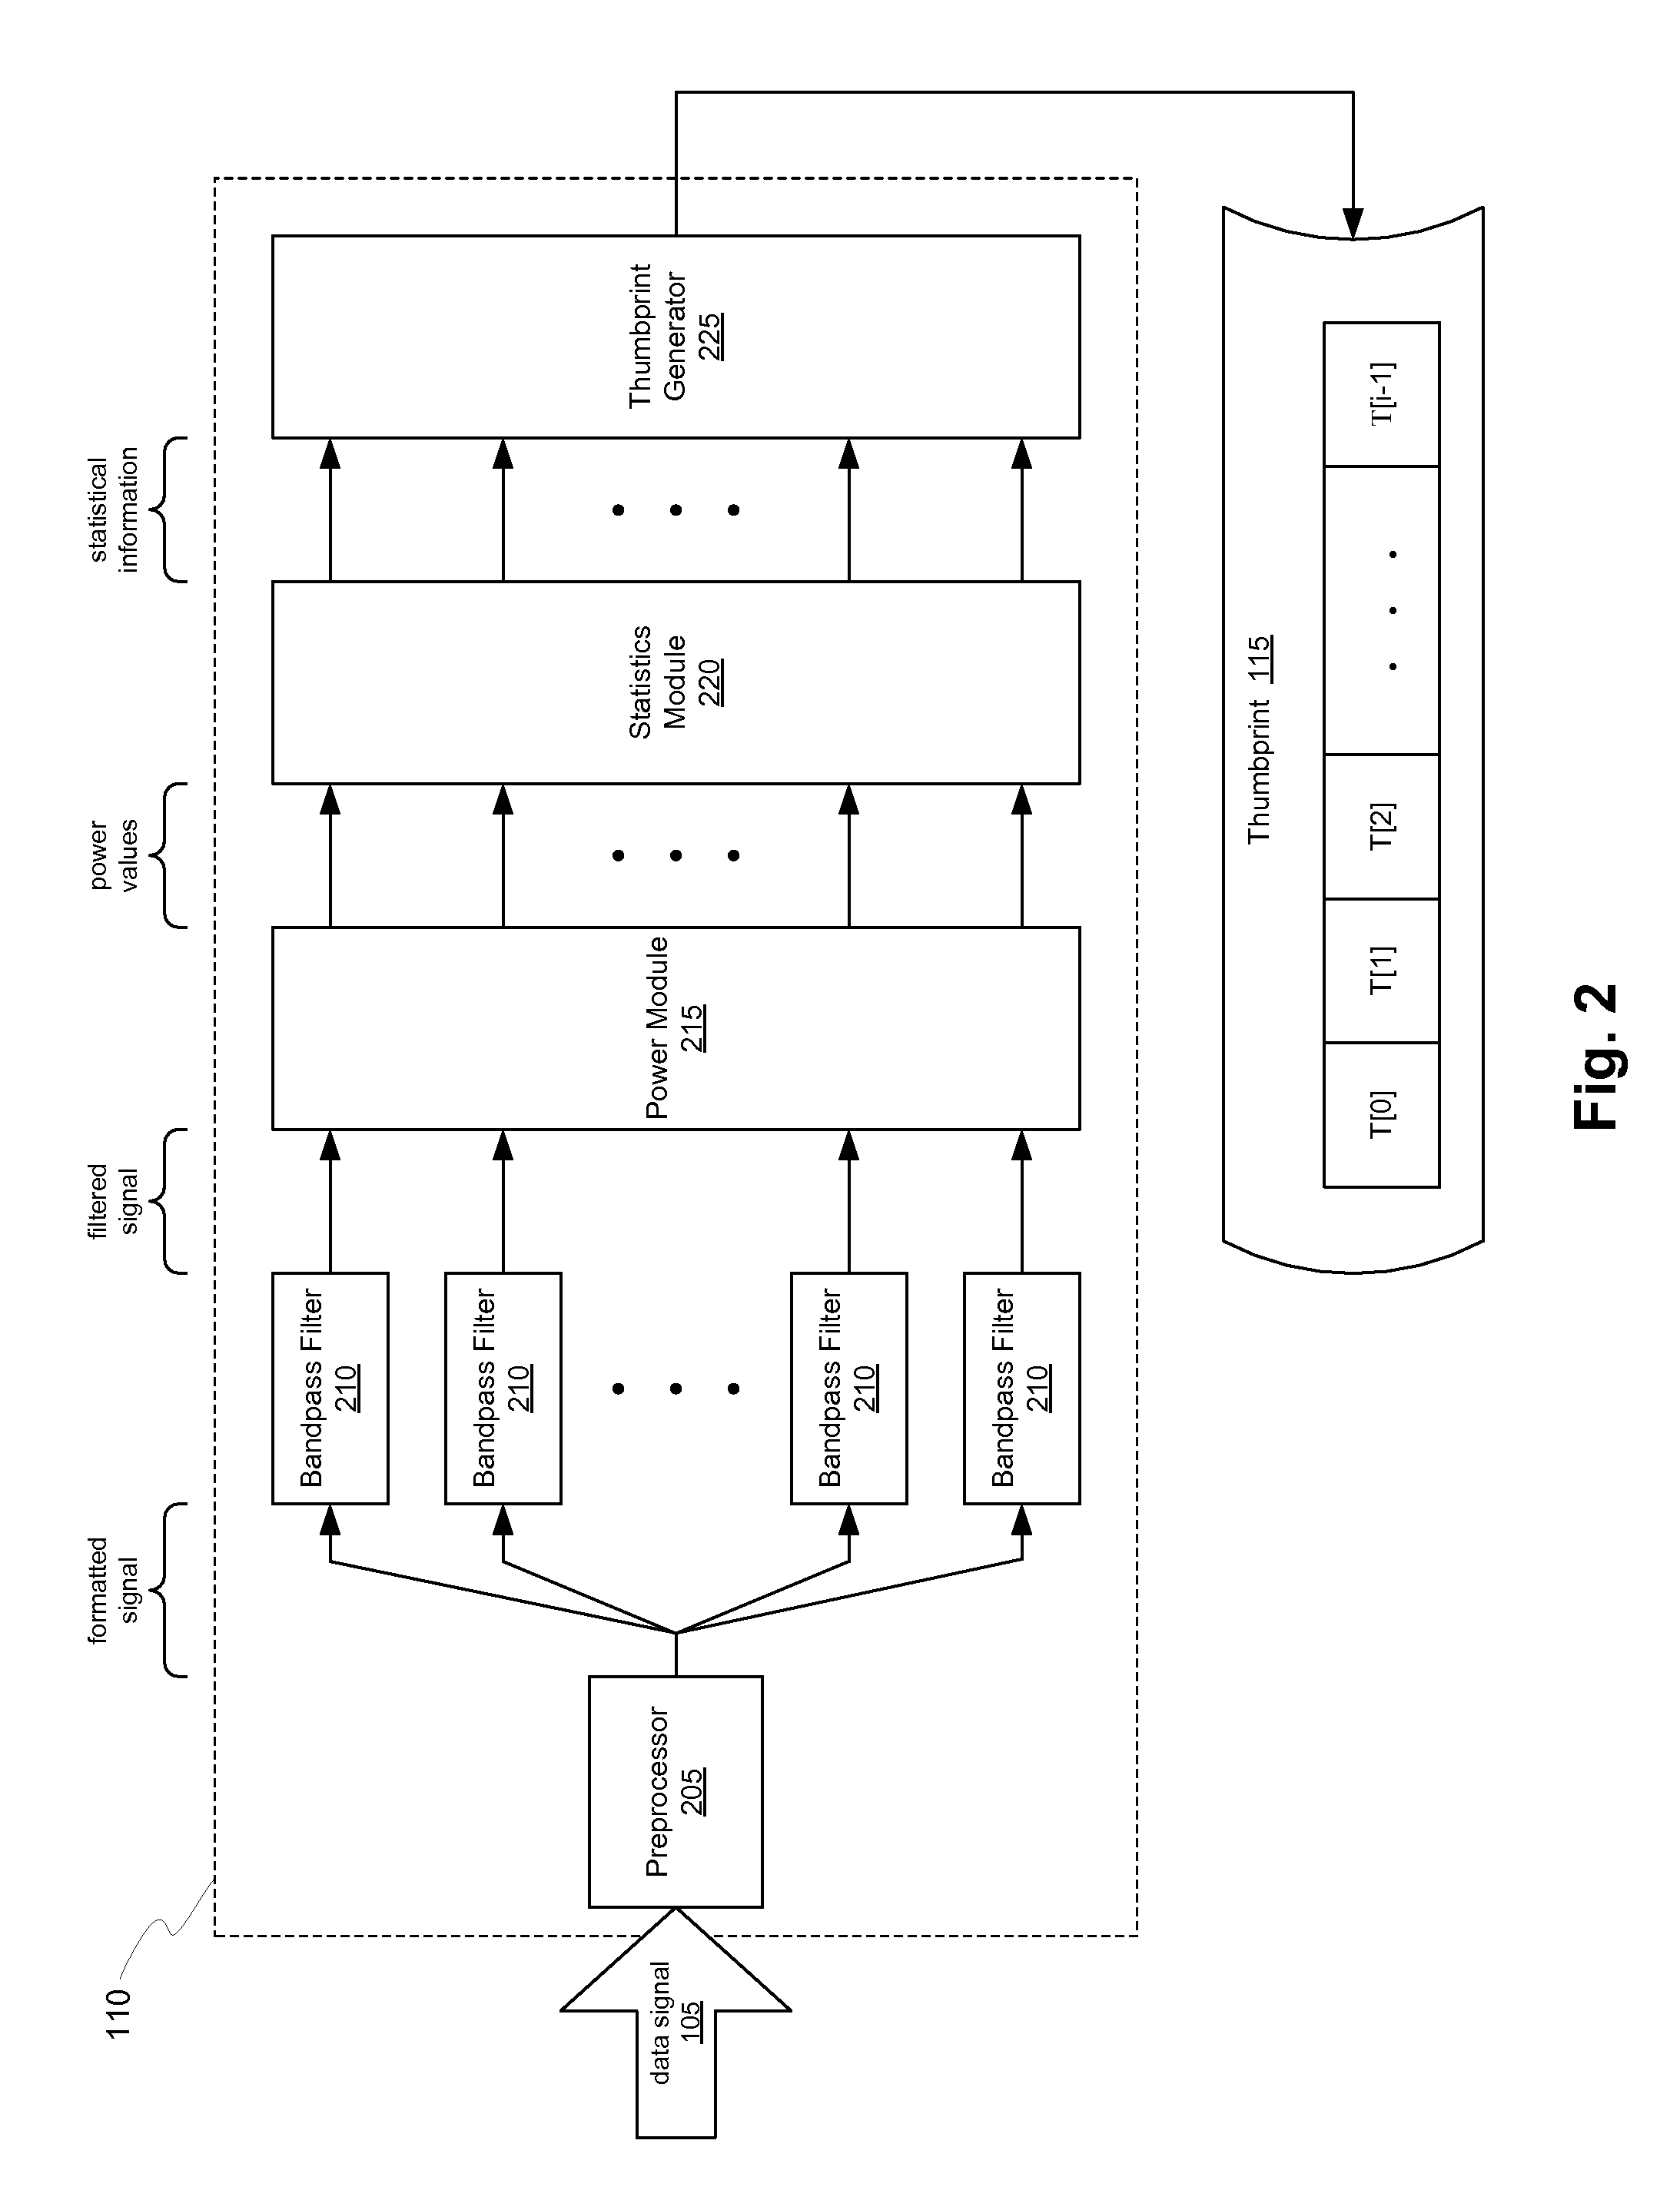 Comparison of data signals using characteristic electronic thumbprints extracted therefrom